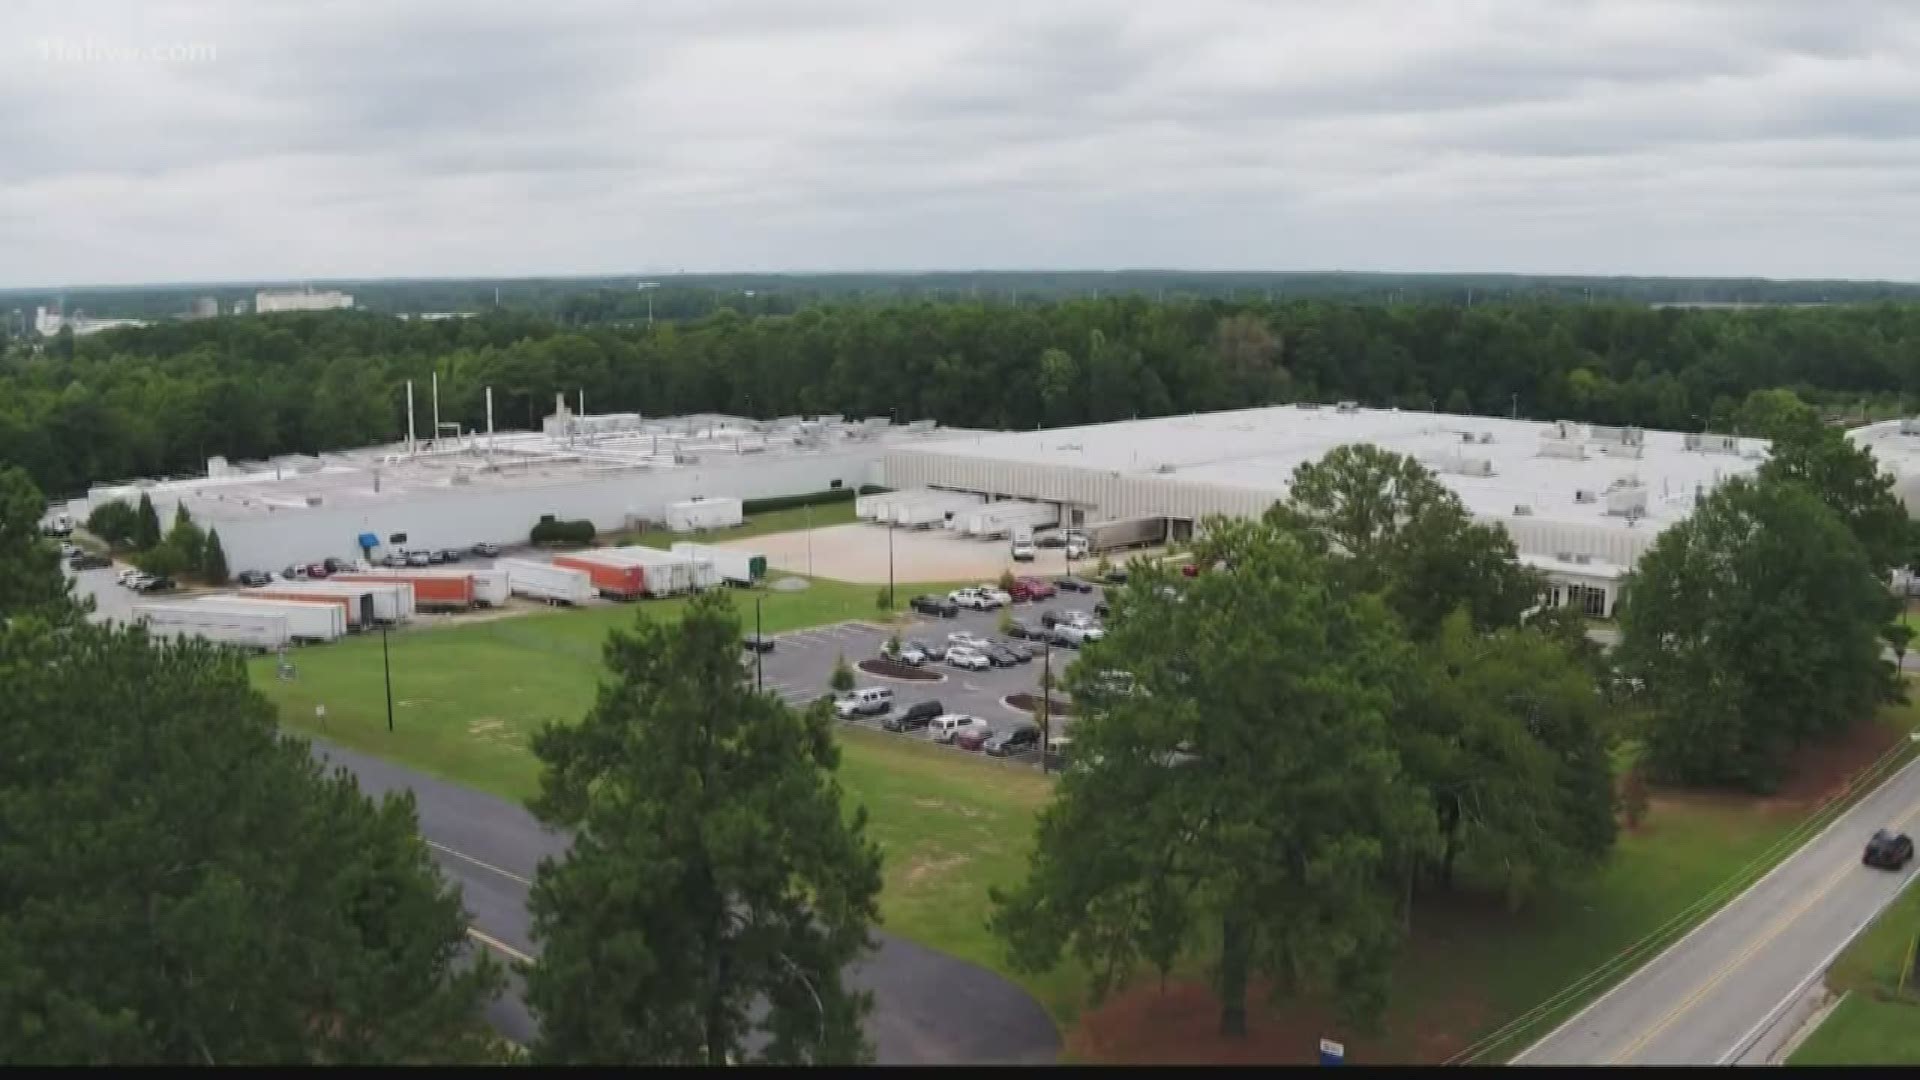 The BD plant in Covington, which emits a cancer-causing gas, refuses to shut down.